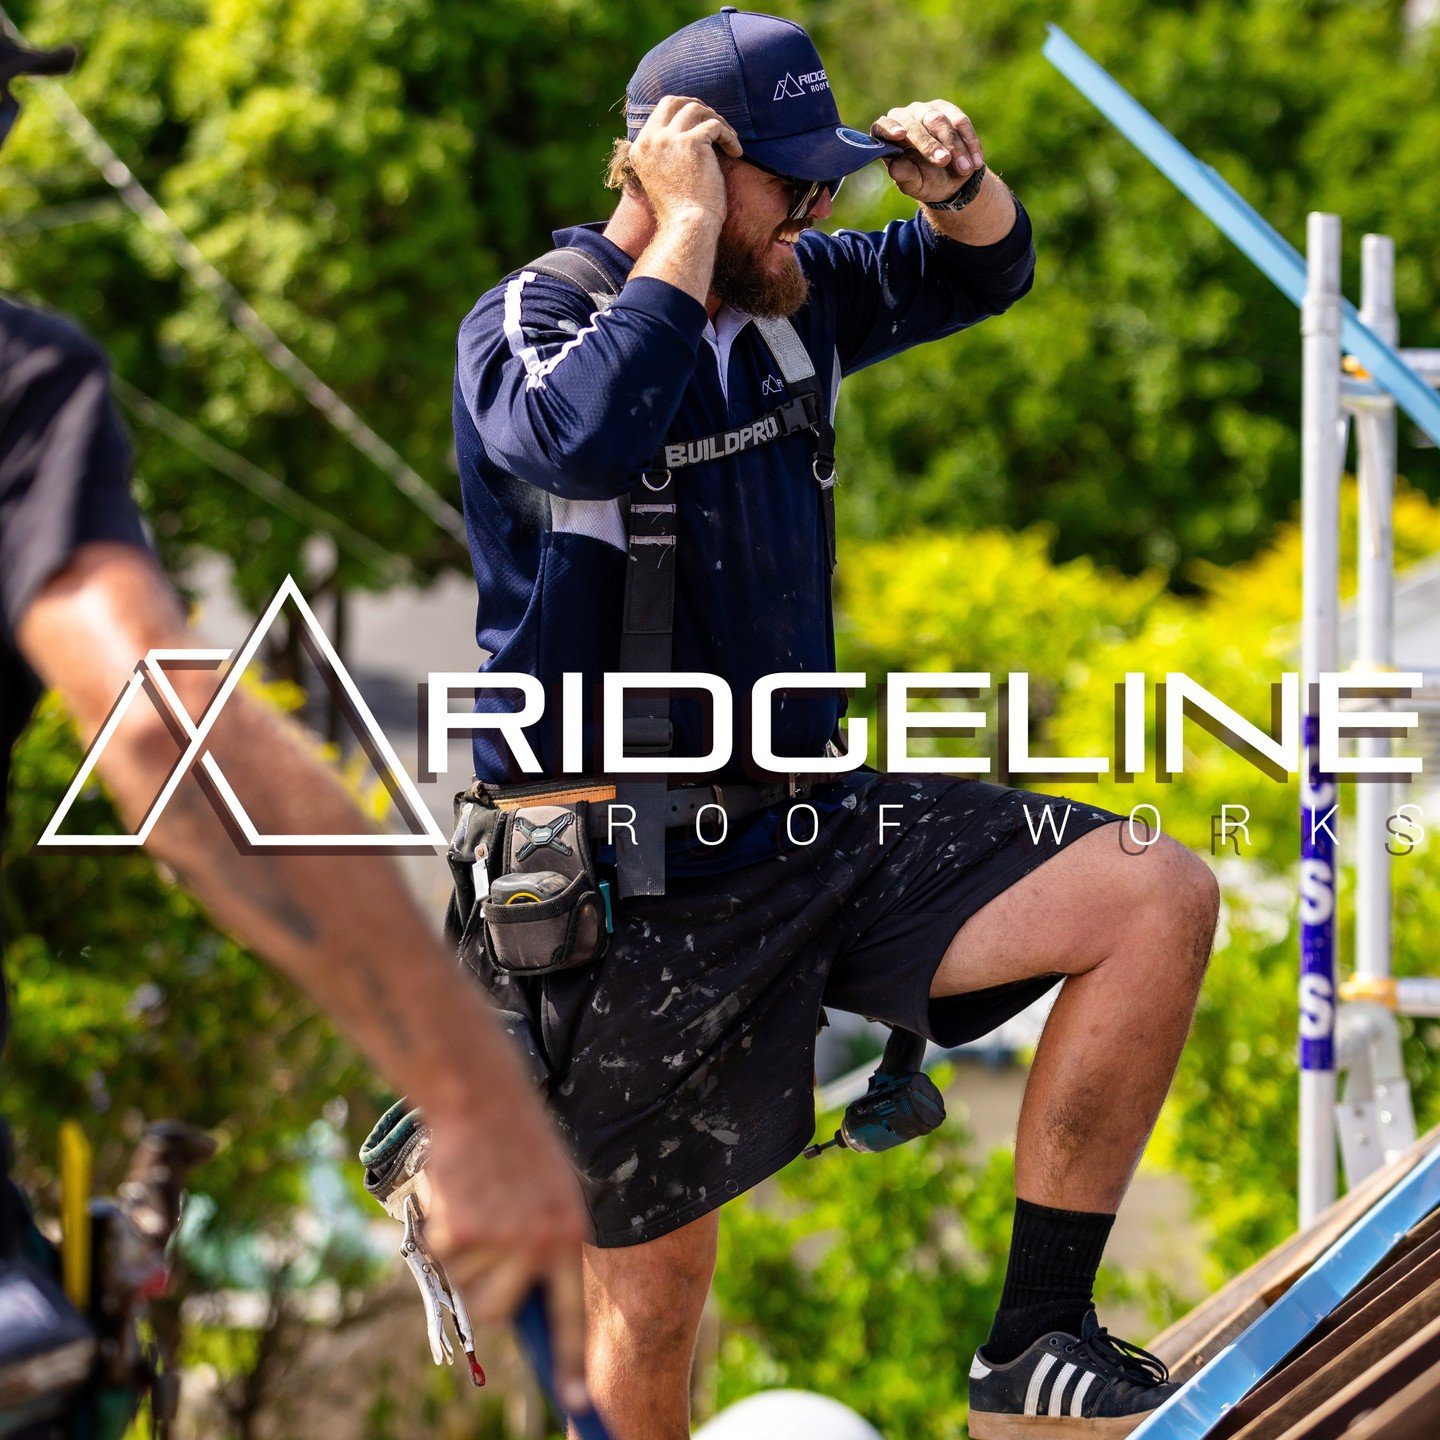 Ridgeline was created to build a better future for our families. We provide a safe, sociable, and supportive environment where our workers feel valued. They support their families by earning a stable wage doing work they enjoy.